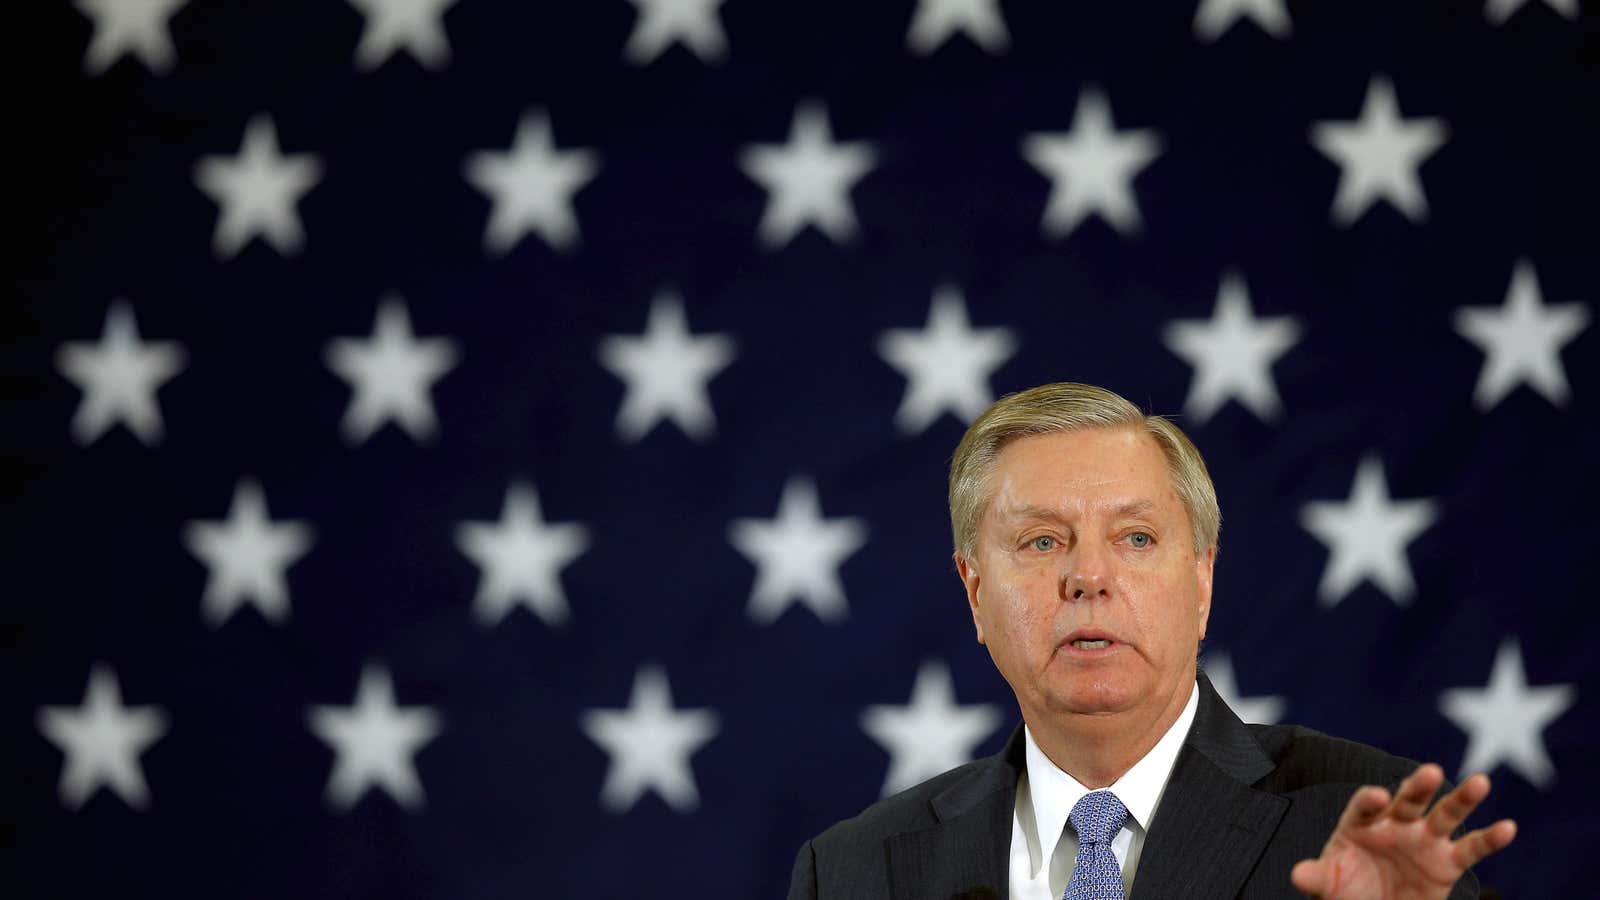 Lindsey Graham is no friend to US immigrants